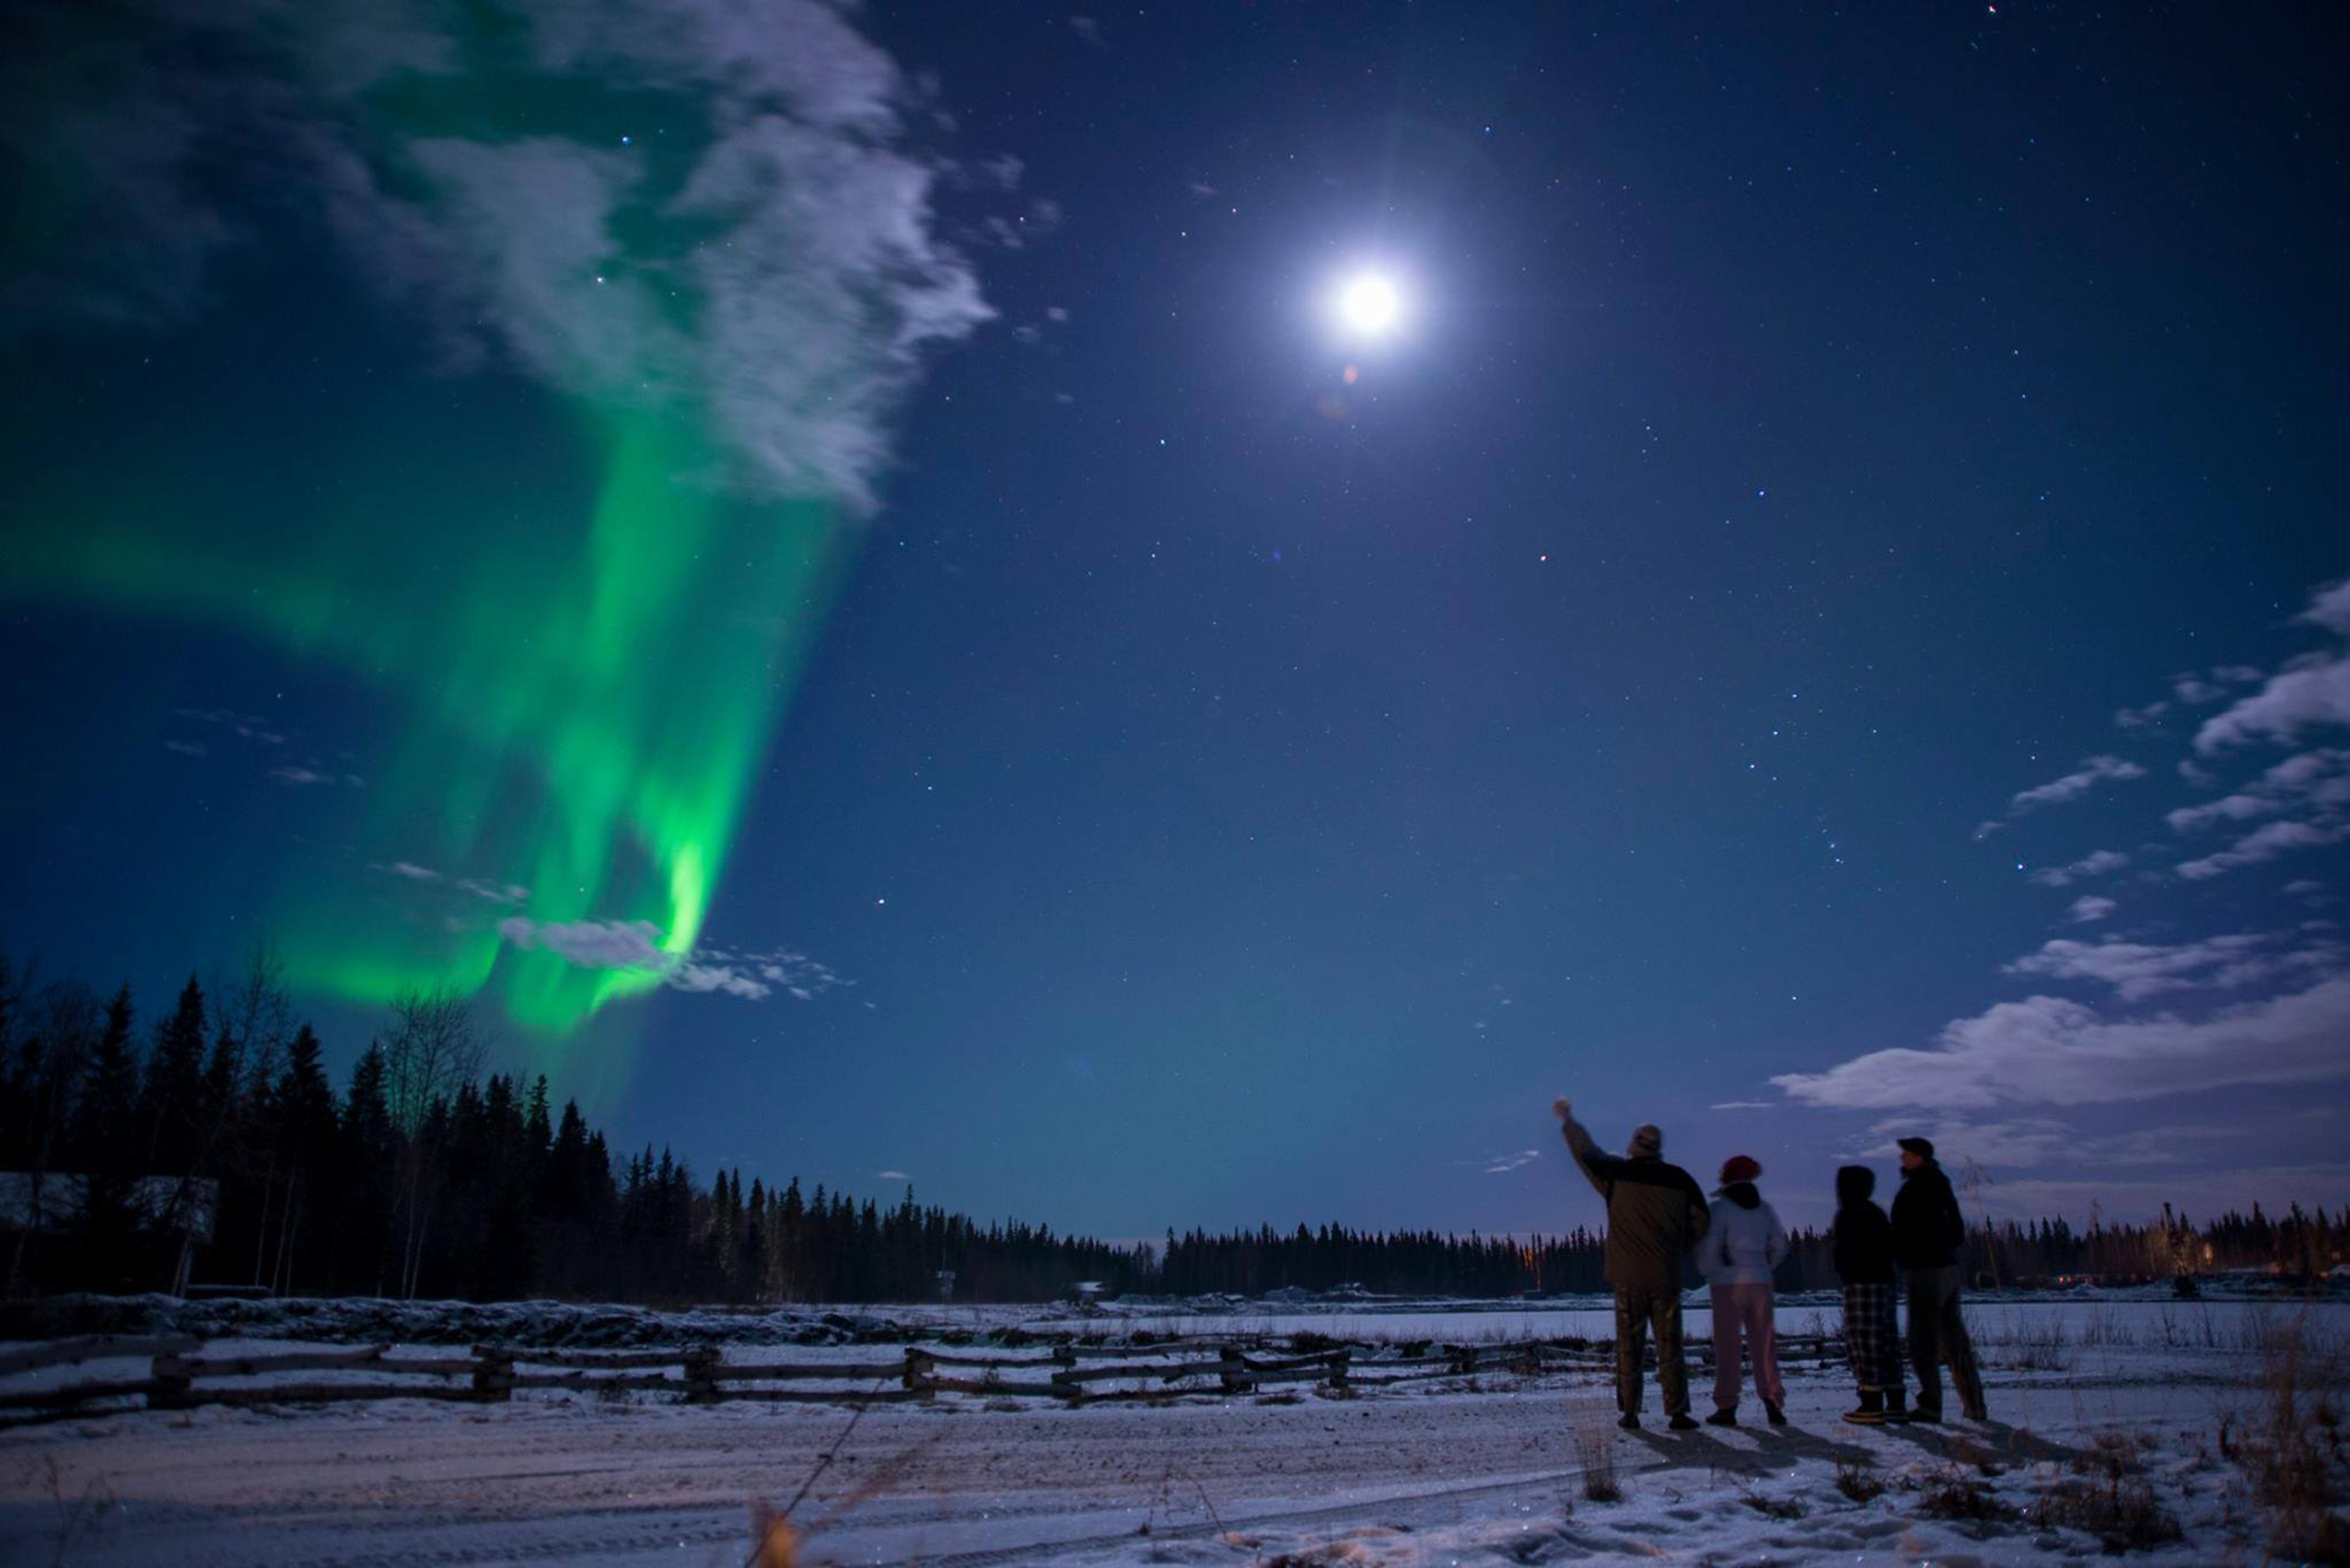 Aurora and full moon with four people watching